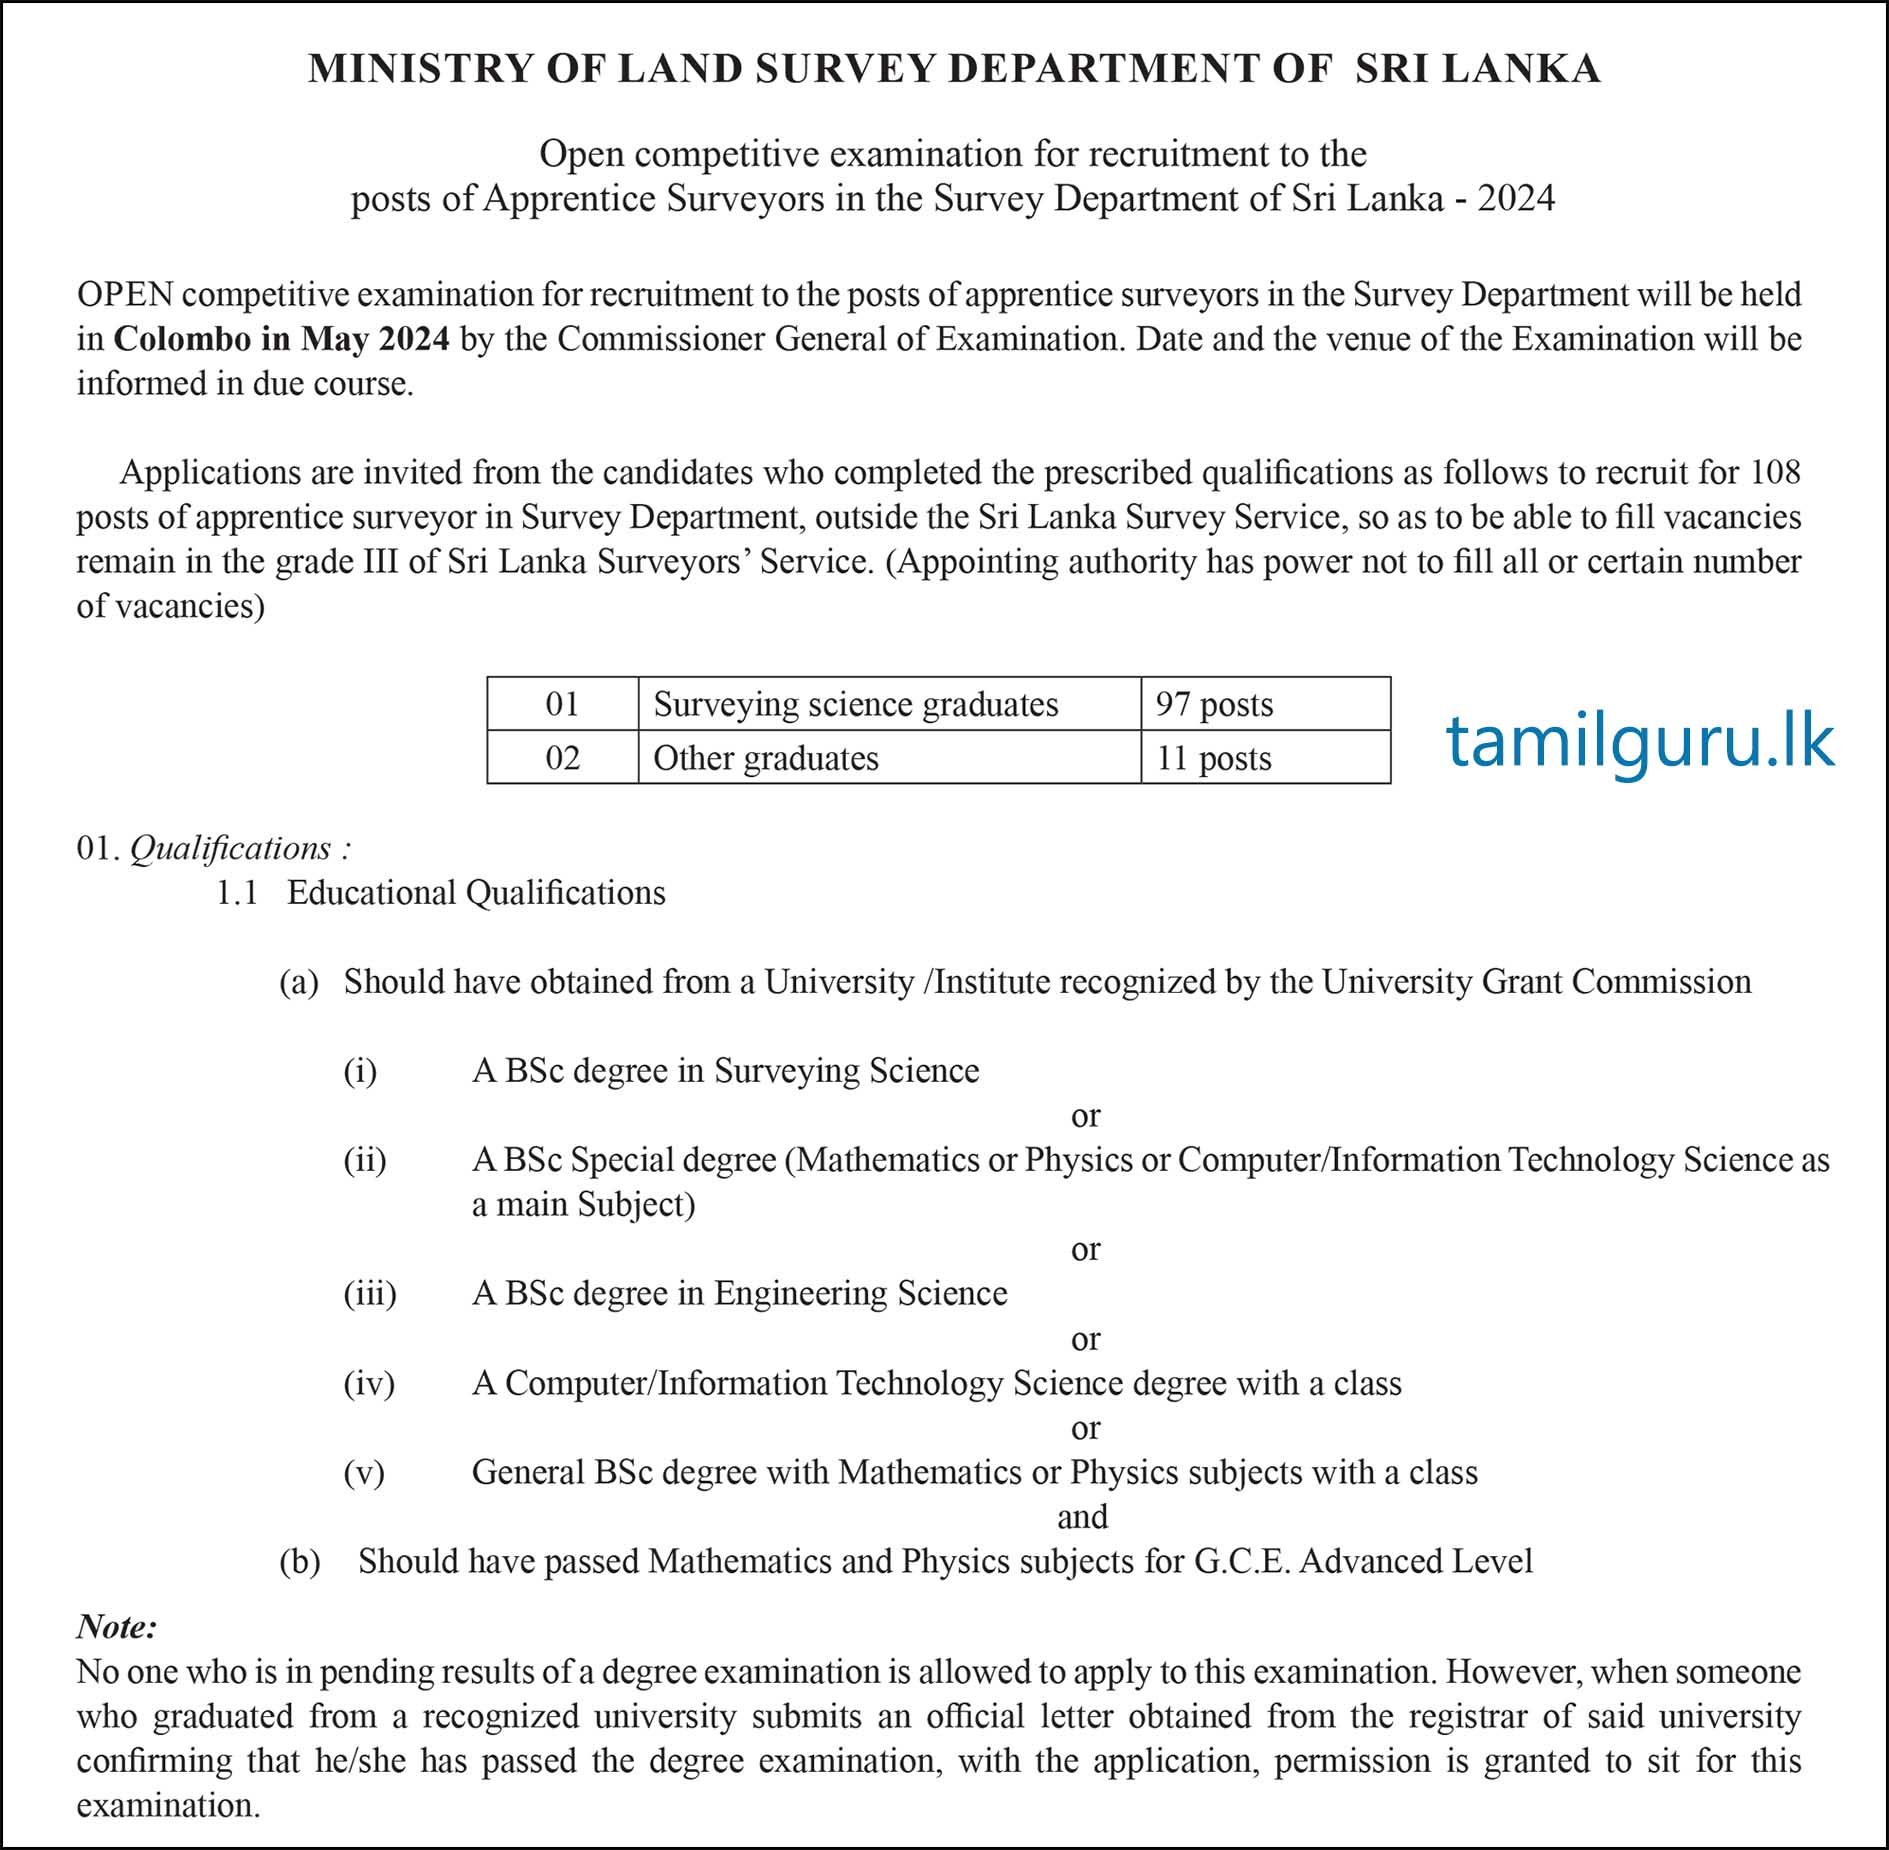 Calling for Applications - Open Competitive Examination for Recruitment to the Posts of Apprentice Surveyors in the Survey Department of Sri Lanka - 2024